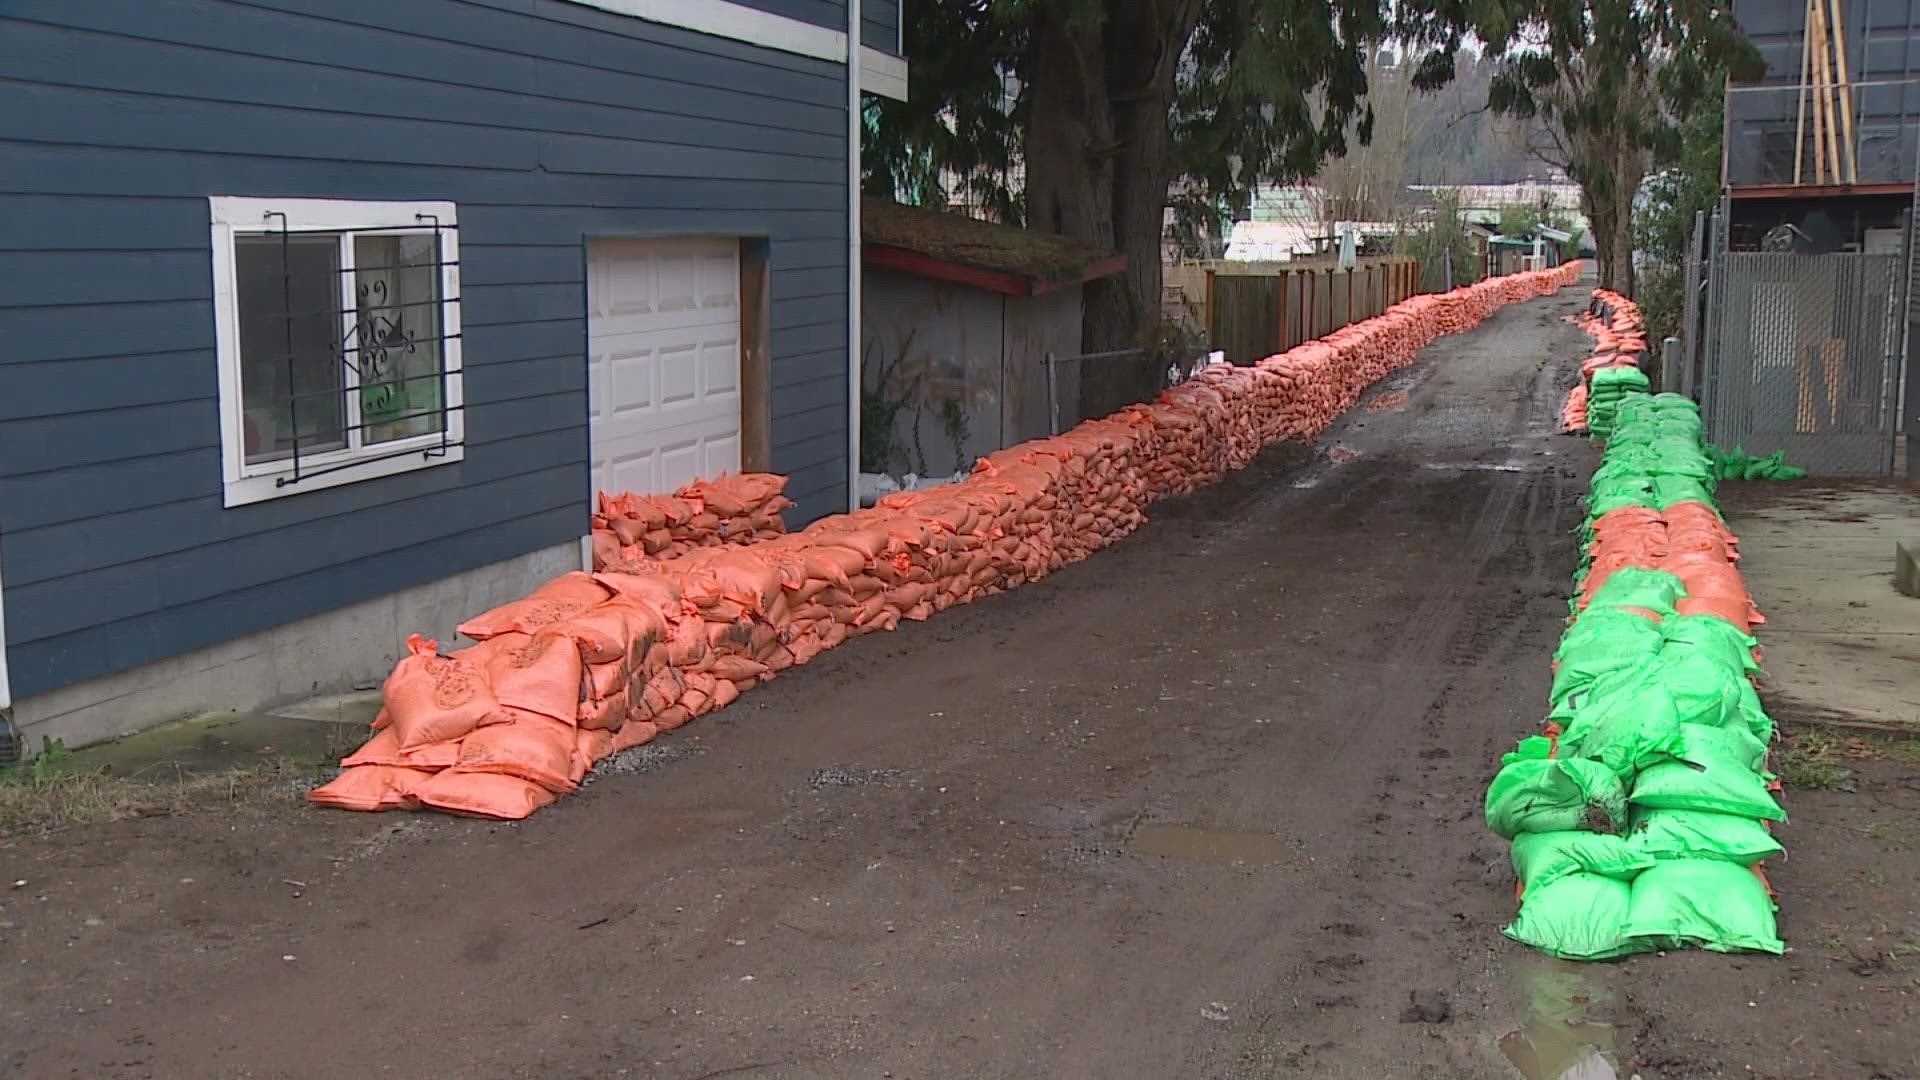 Forklifts carrying sandbags have been running nonstop, creating a barrier not just on the Duwamish but in alleys and at people’s front doors.